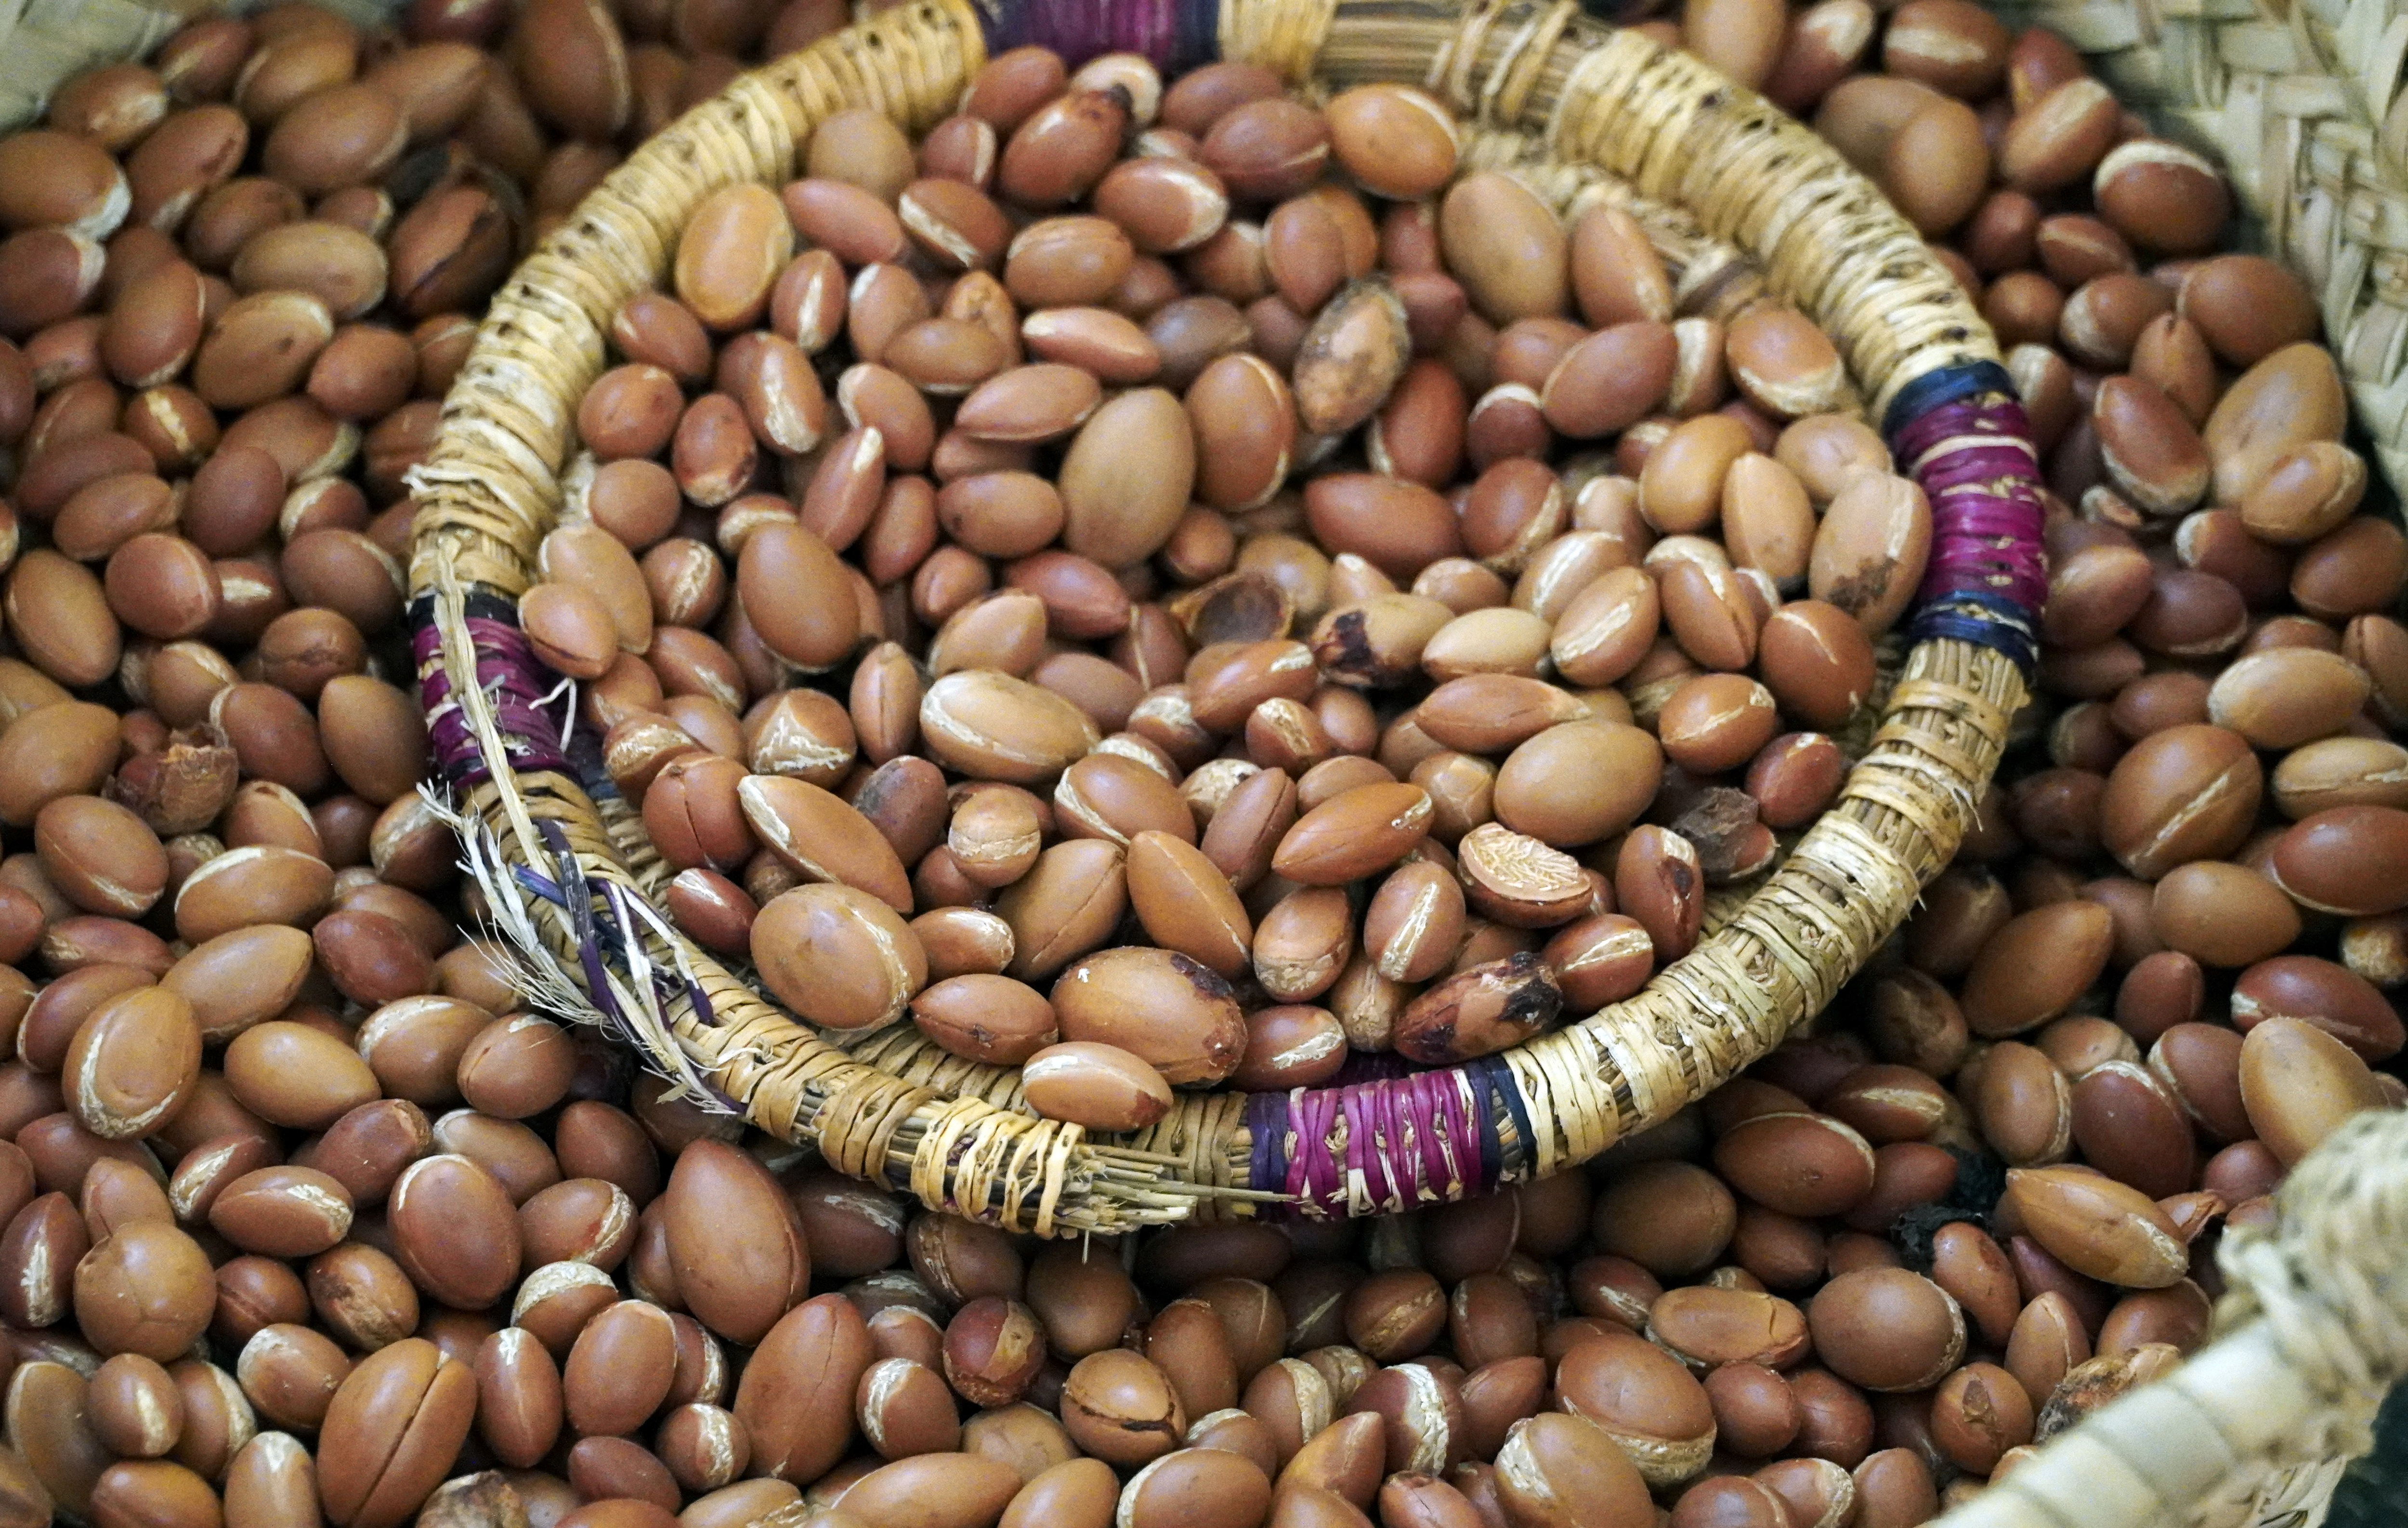 Argan nuts are pictured at Women's Agricultural Cooperative Taitmatine, in Tiout, near Taroudant, Morocco June 10, 2021. (REUTERS)